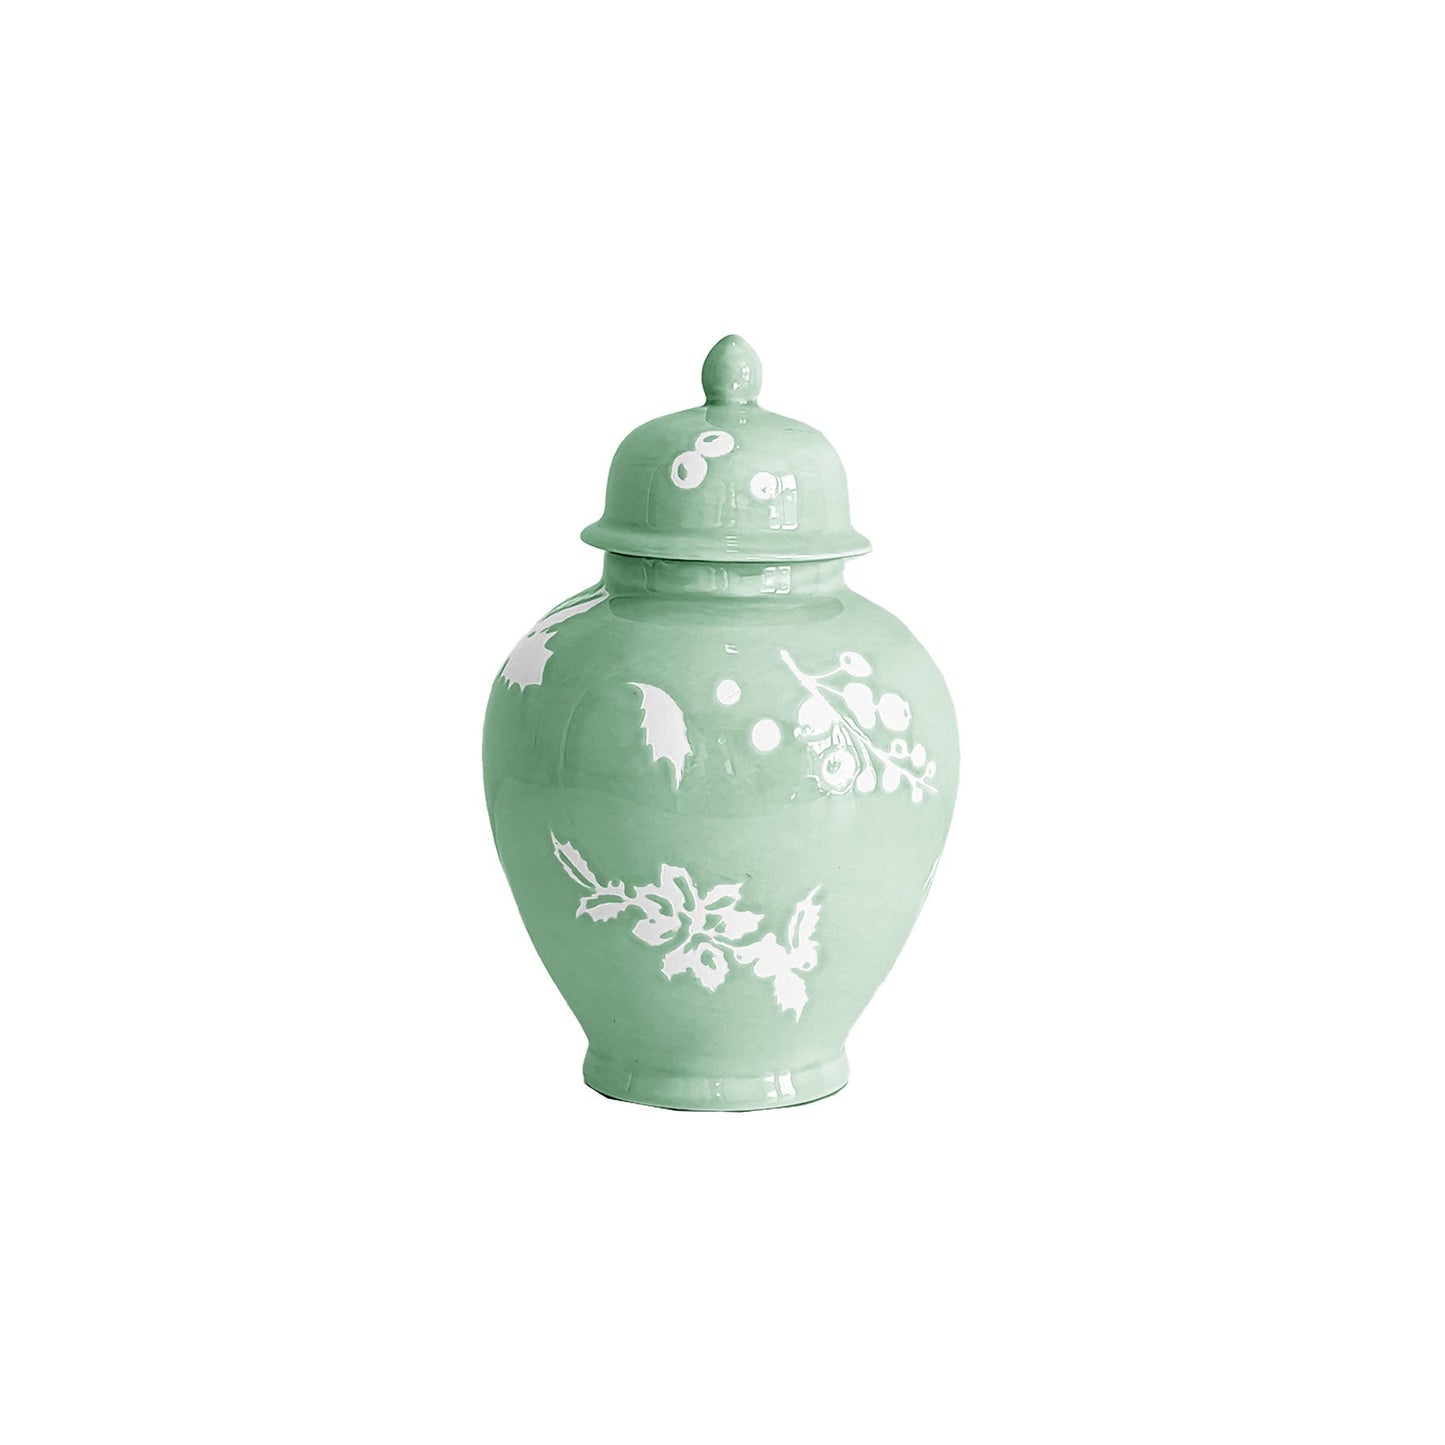 Deck the Halls Ginger Jars in Sea Glass | Wholesale